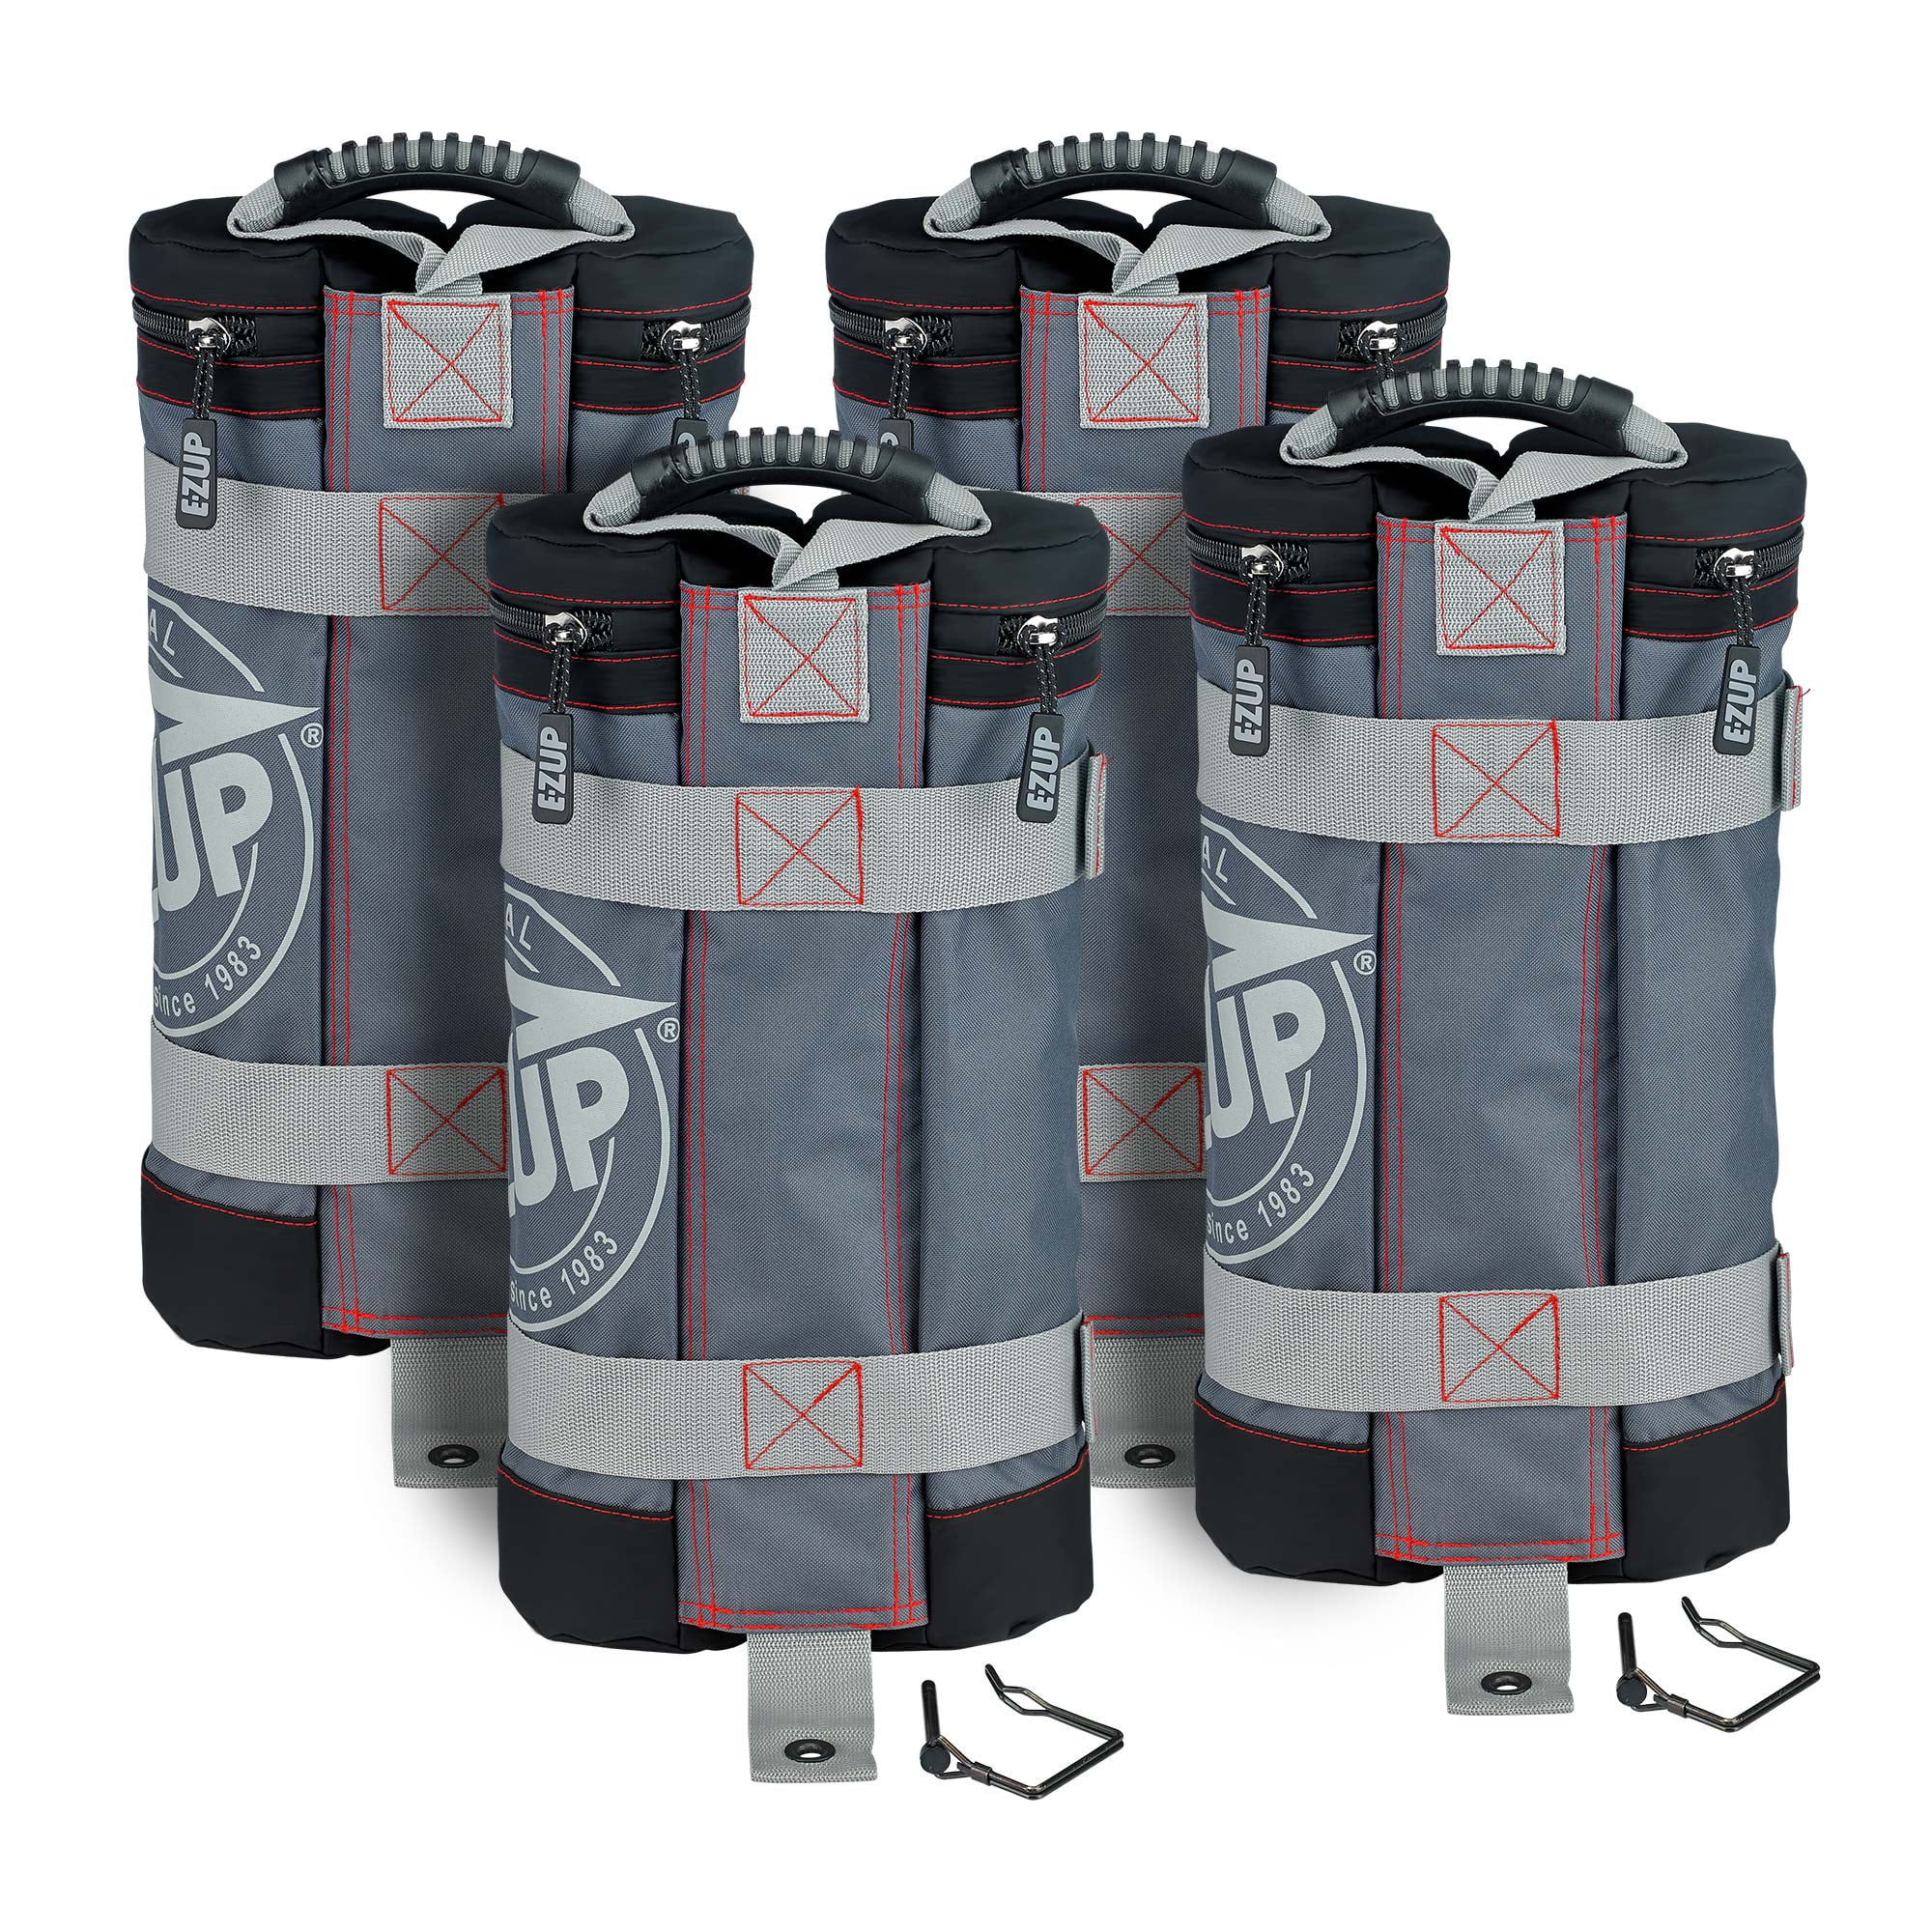 EZ UP Fillable Weight Bag Set of 4, Holds up to 25 lbs. Each, Steel Gray